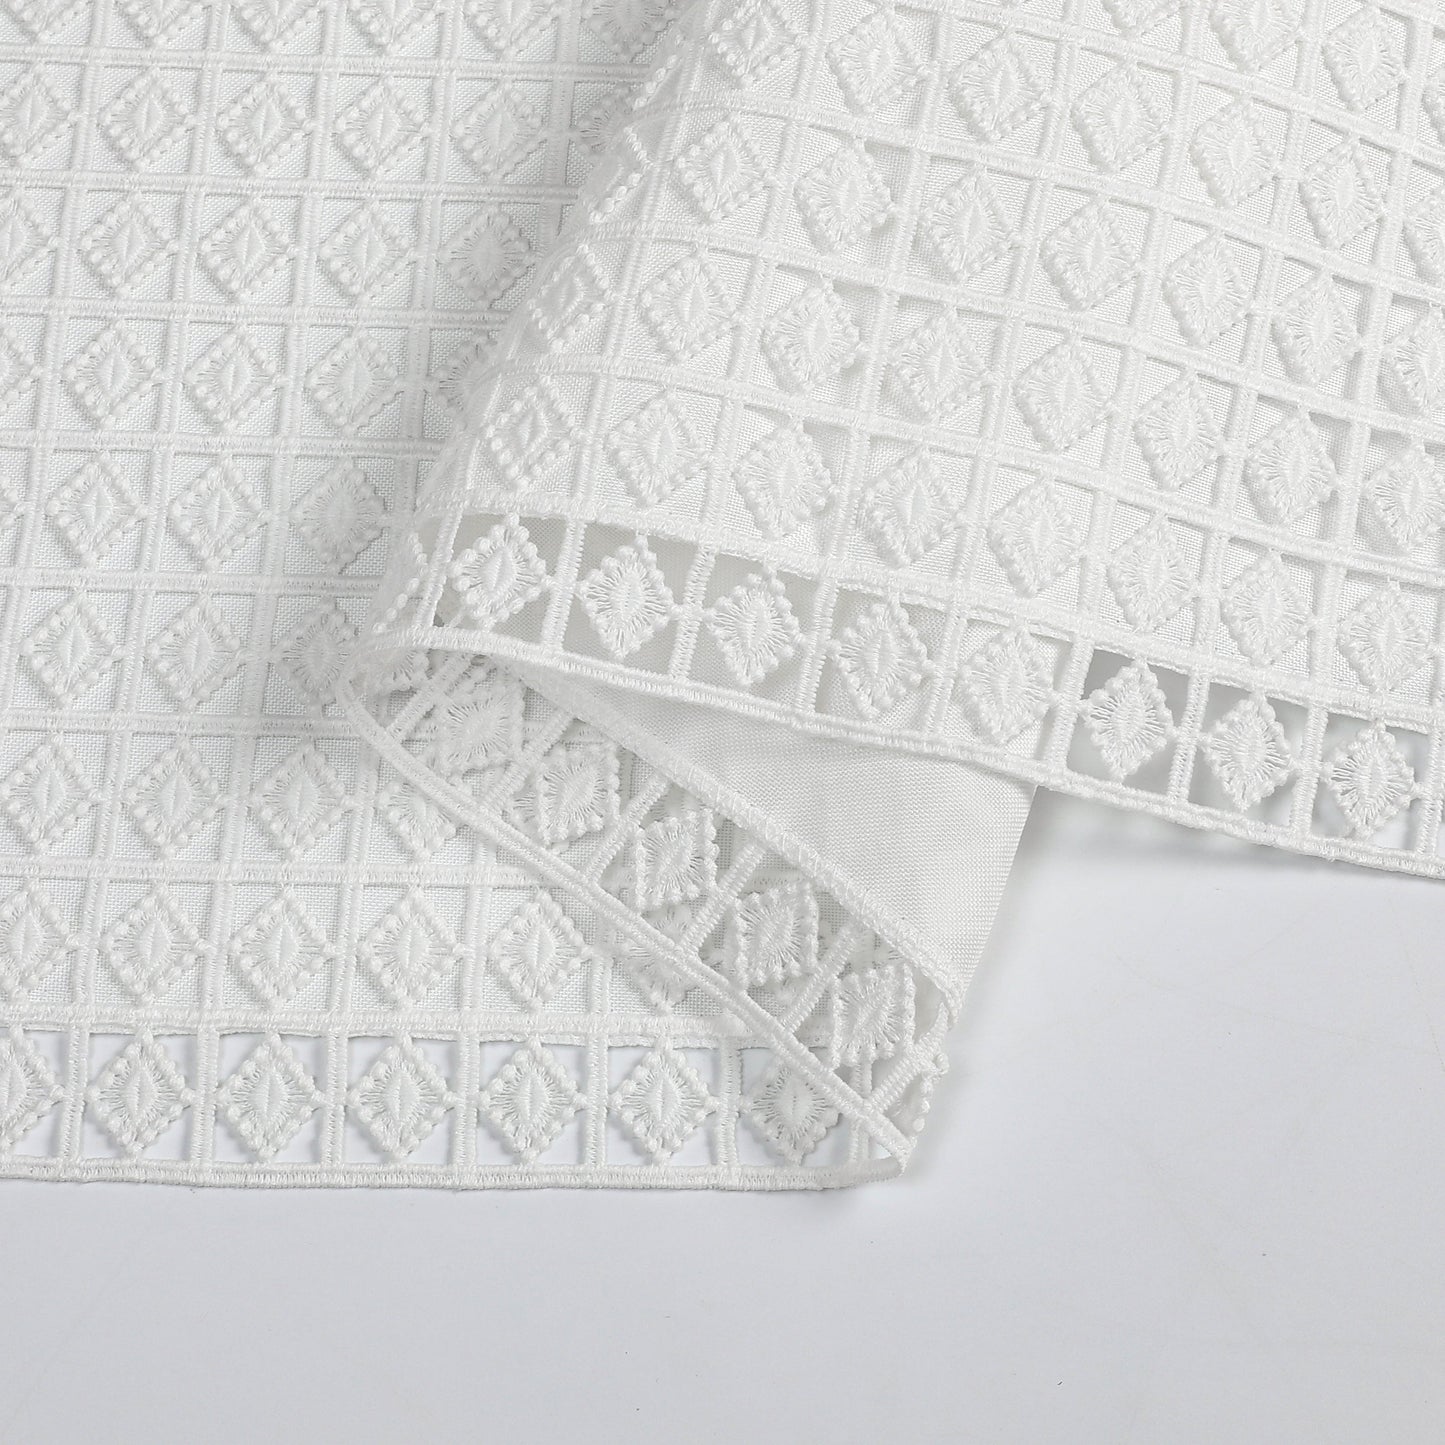 Tablecloth Lace Unlined #TC1727UL